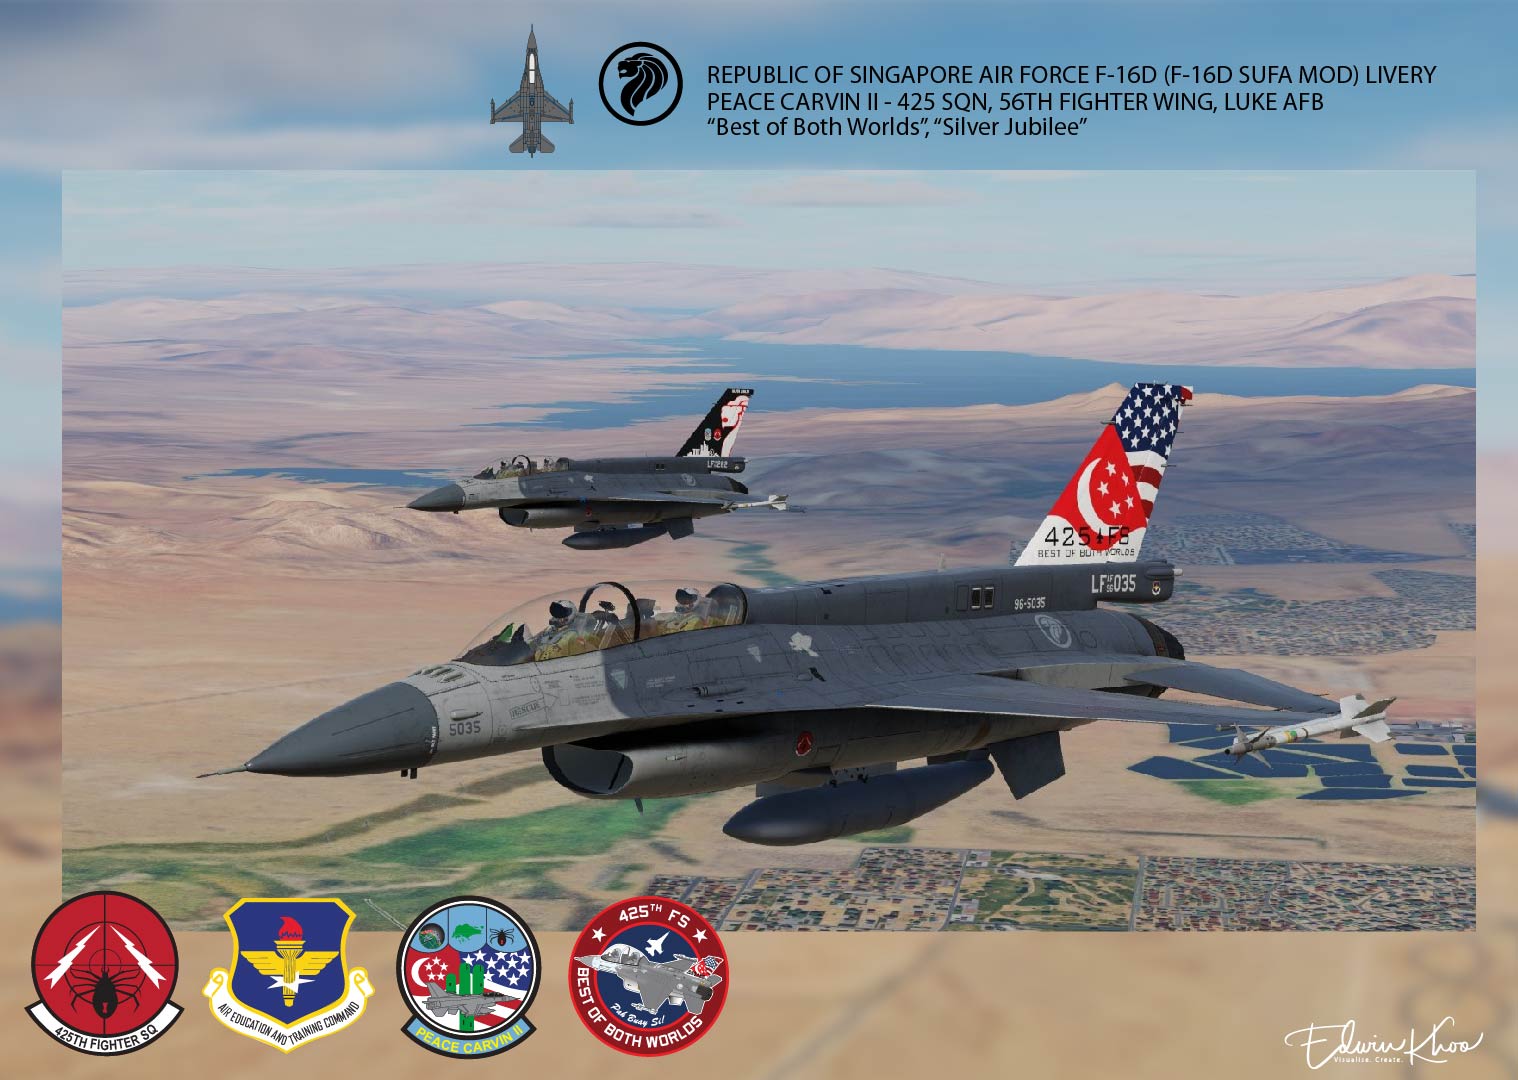 Republic of Singapore Air Force (RSAF) Livery for the F-16D (IDF Mods Project - F-16I Sufa v2.2) Part 3 of 3